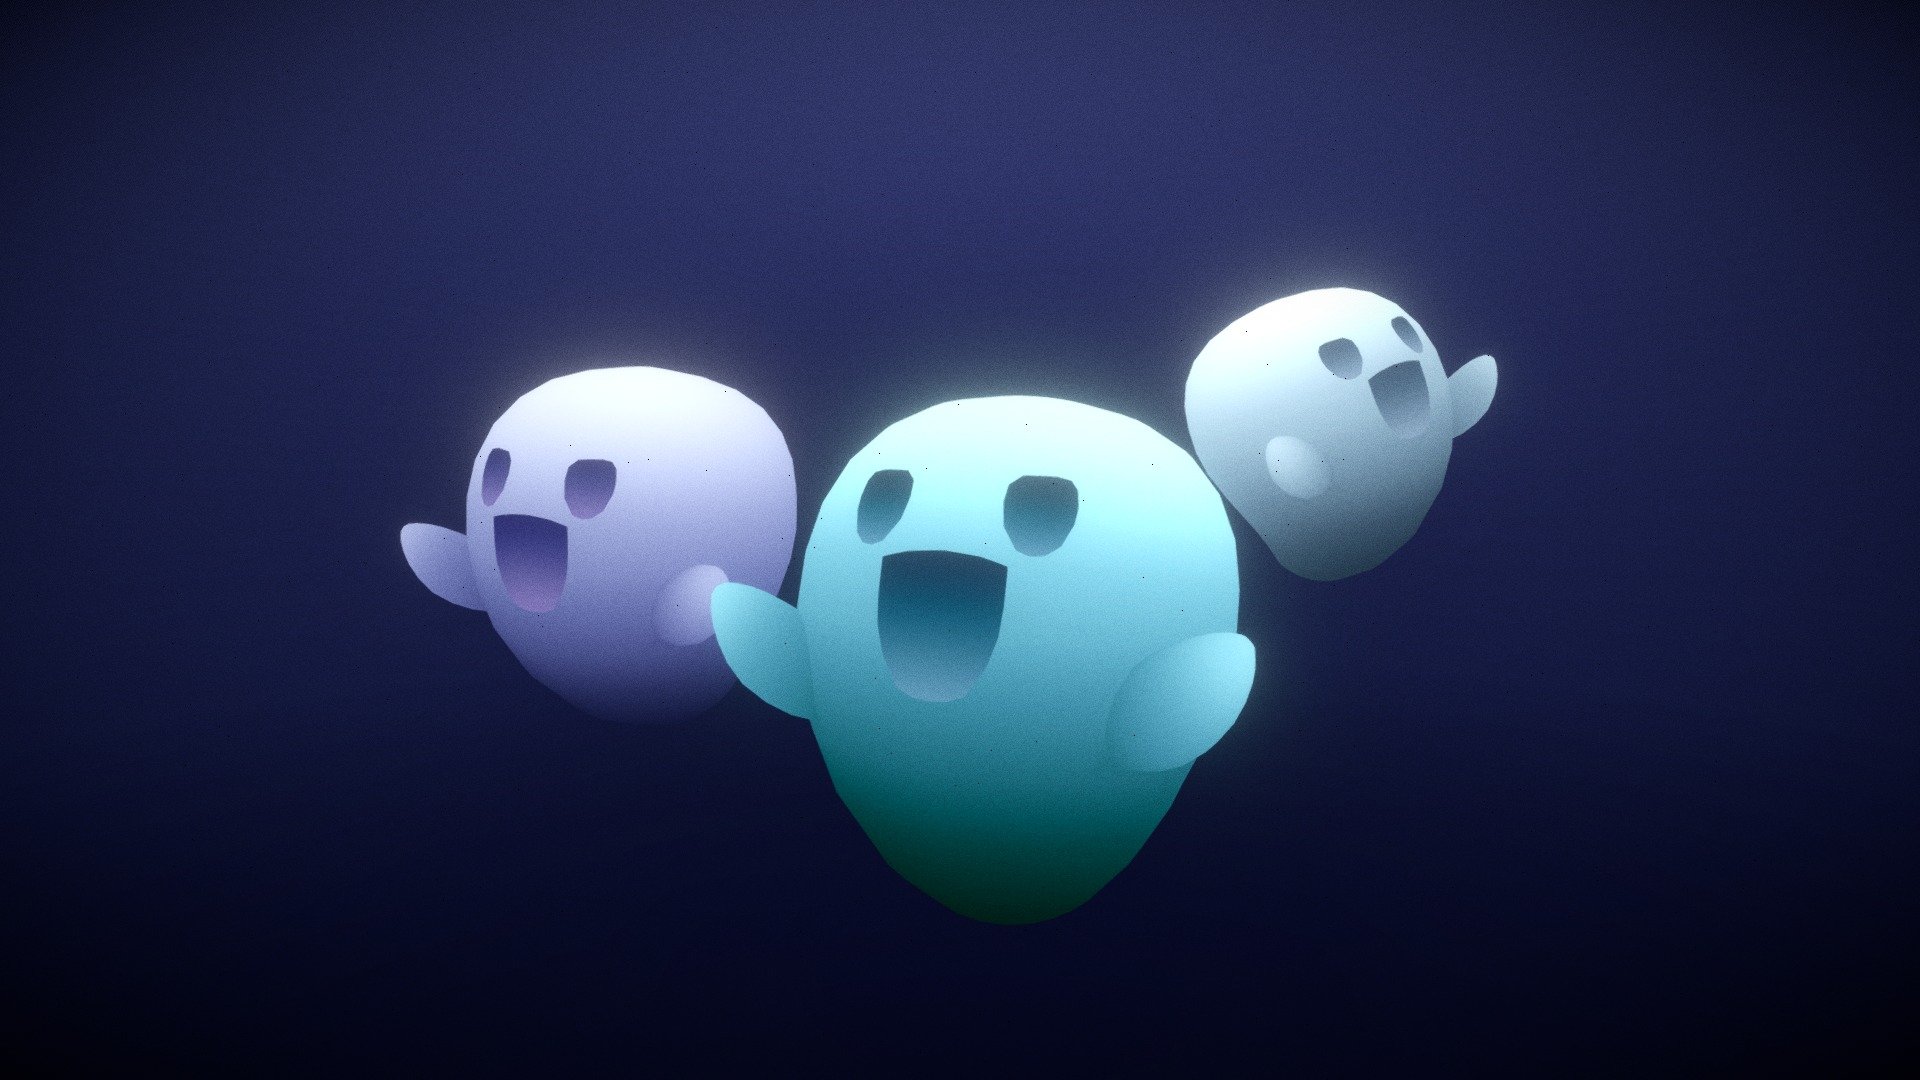 cute ghosts.

Textured with gradient atlas, so it is performant for mobile games and video games.

Like a few of my other assets in the same style, it uses a single texture diffuse map and is mapped using only color gradients. 
All gradient textures can be extended and combined to a large atlas.

There are more assets in this style to add to your game scene or environment. Check out my sale.

If you want to change the colors of the assets, you just need to move the UVs on the atlas to a different gradient.
Or contact me for changes, for a small fee.

**I also accept freelance jobs. Do not hesitate to write me. **

*-------------Terms of Use--------------

Commercial use of the assets  provided is permitted but cannot be included in an asset pack or sold at any sort of asset/resource marketplace.*

9213140

5207418 - Cute Ghosts Halloween - Buy Royalty Free 3D model by Stylized Box (@Stylized_Box) 3d model